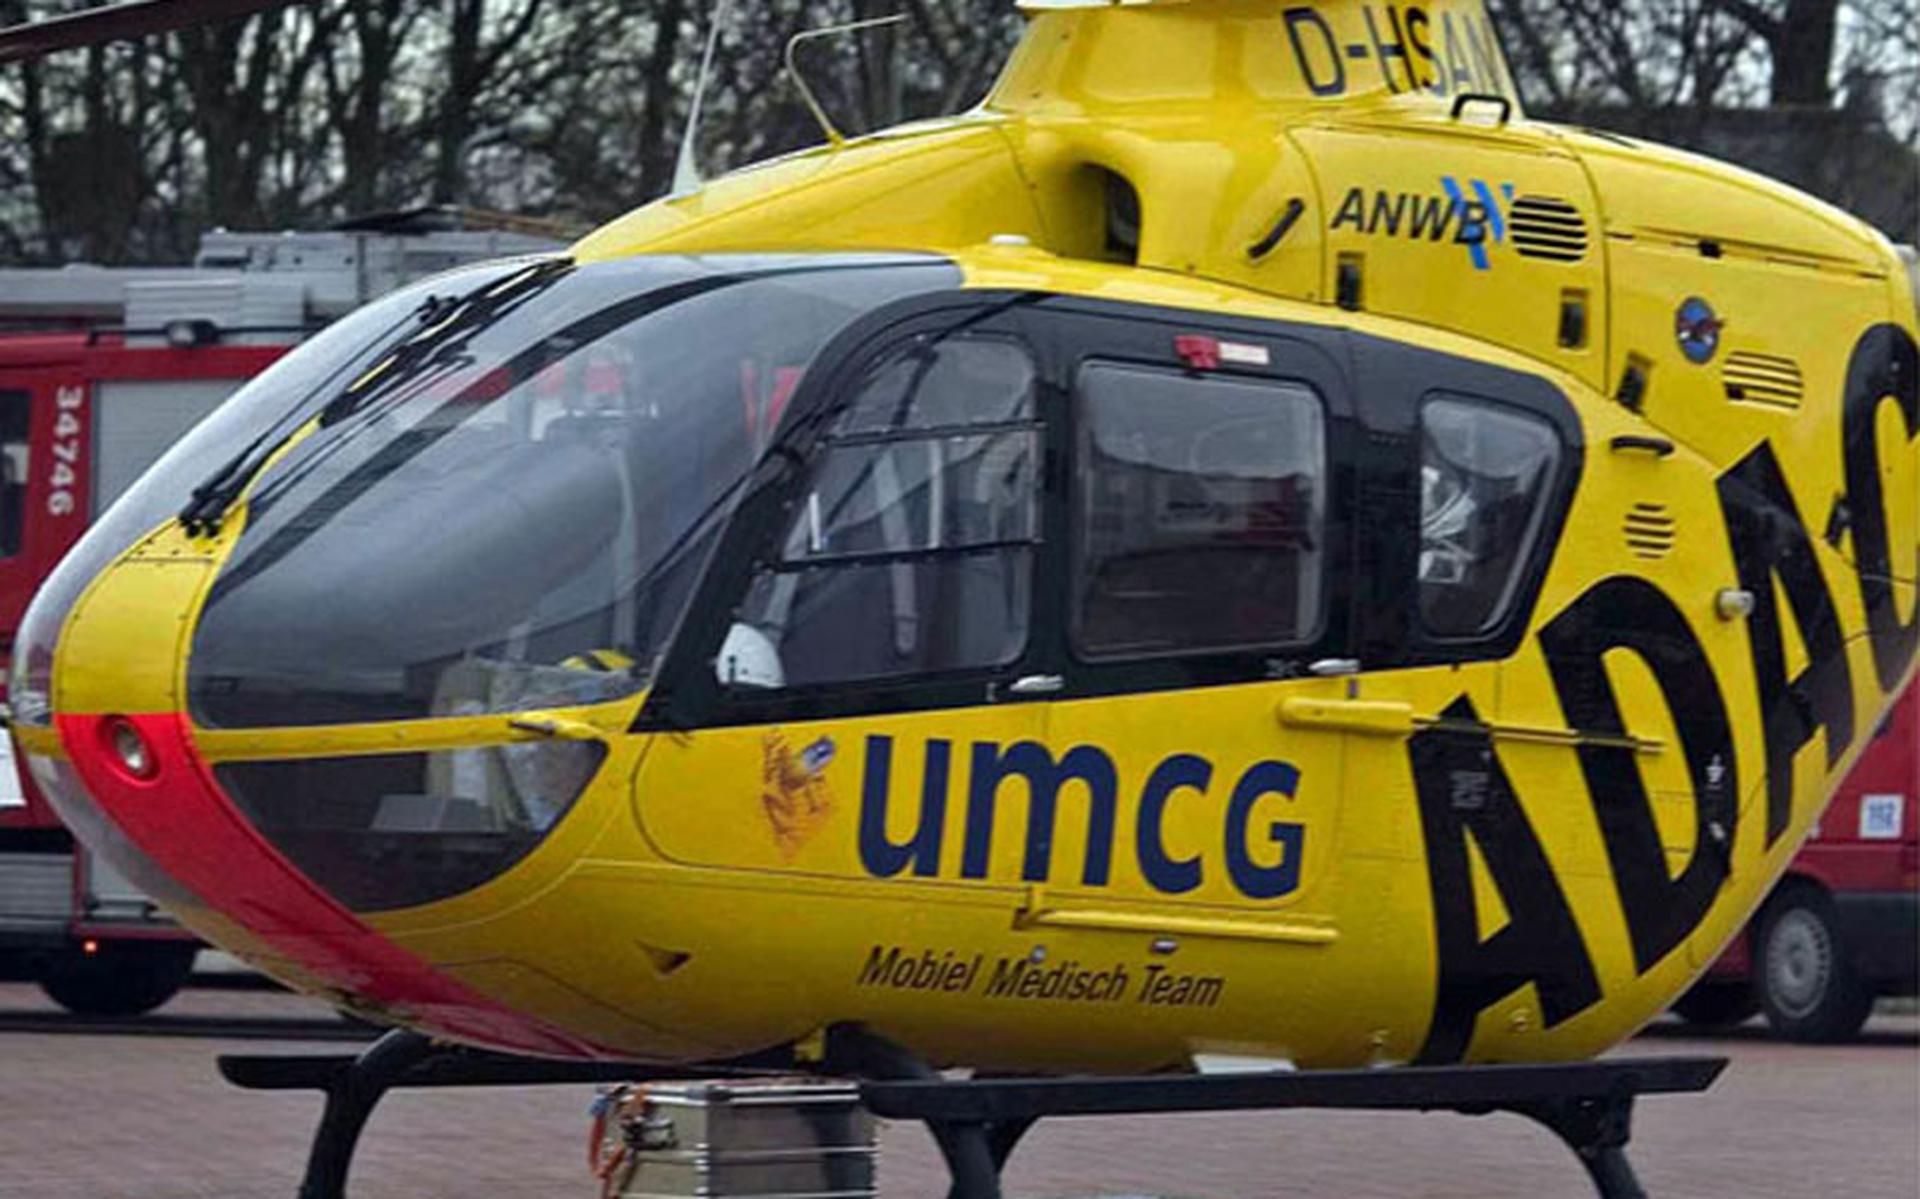 Traumahelikopter. FOTO ARCHIEF DVHN